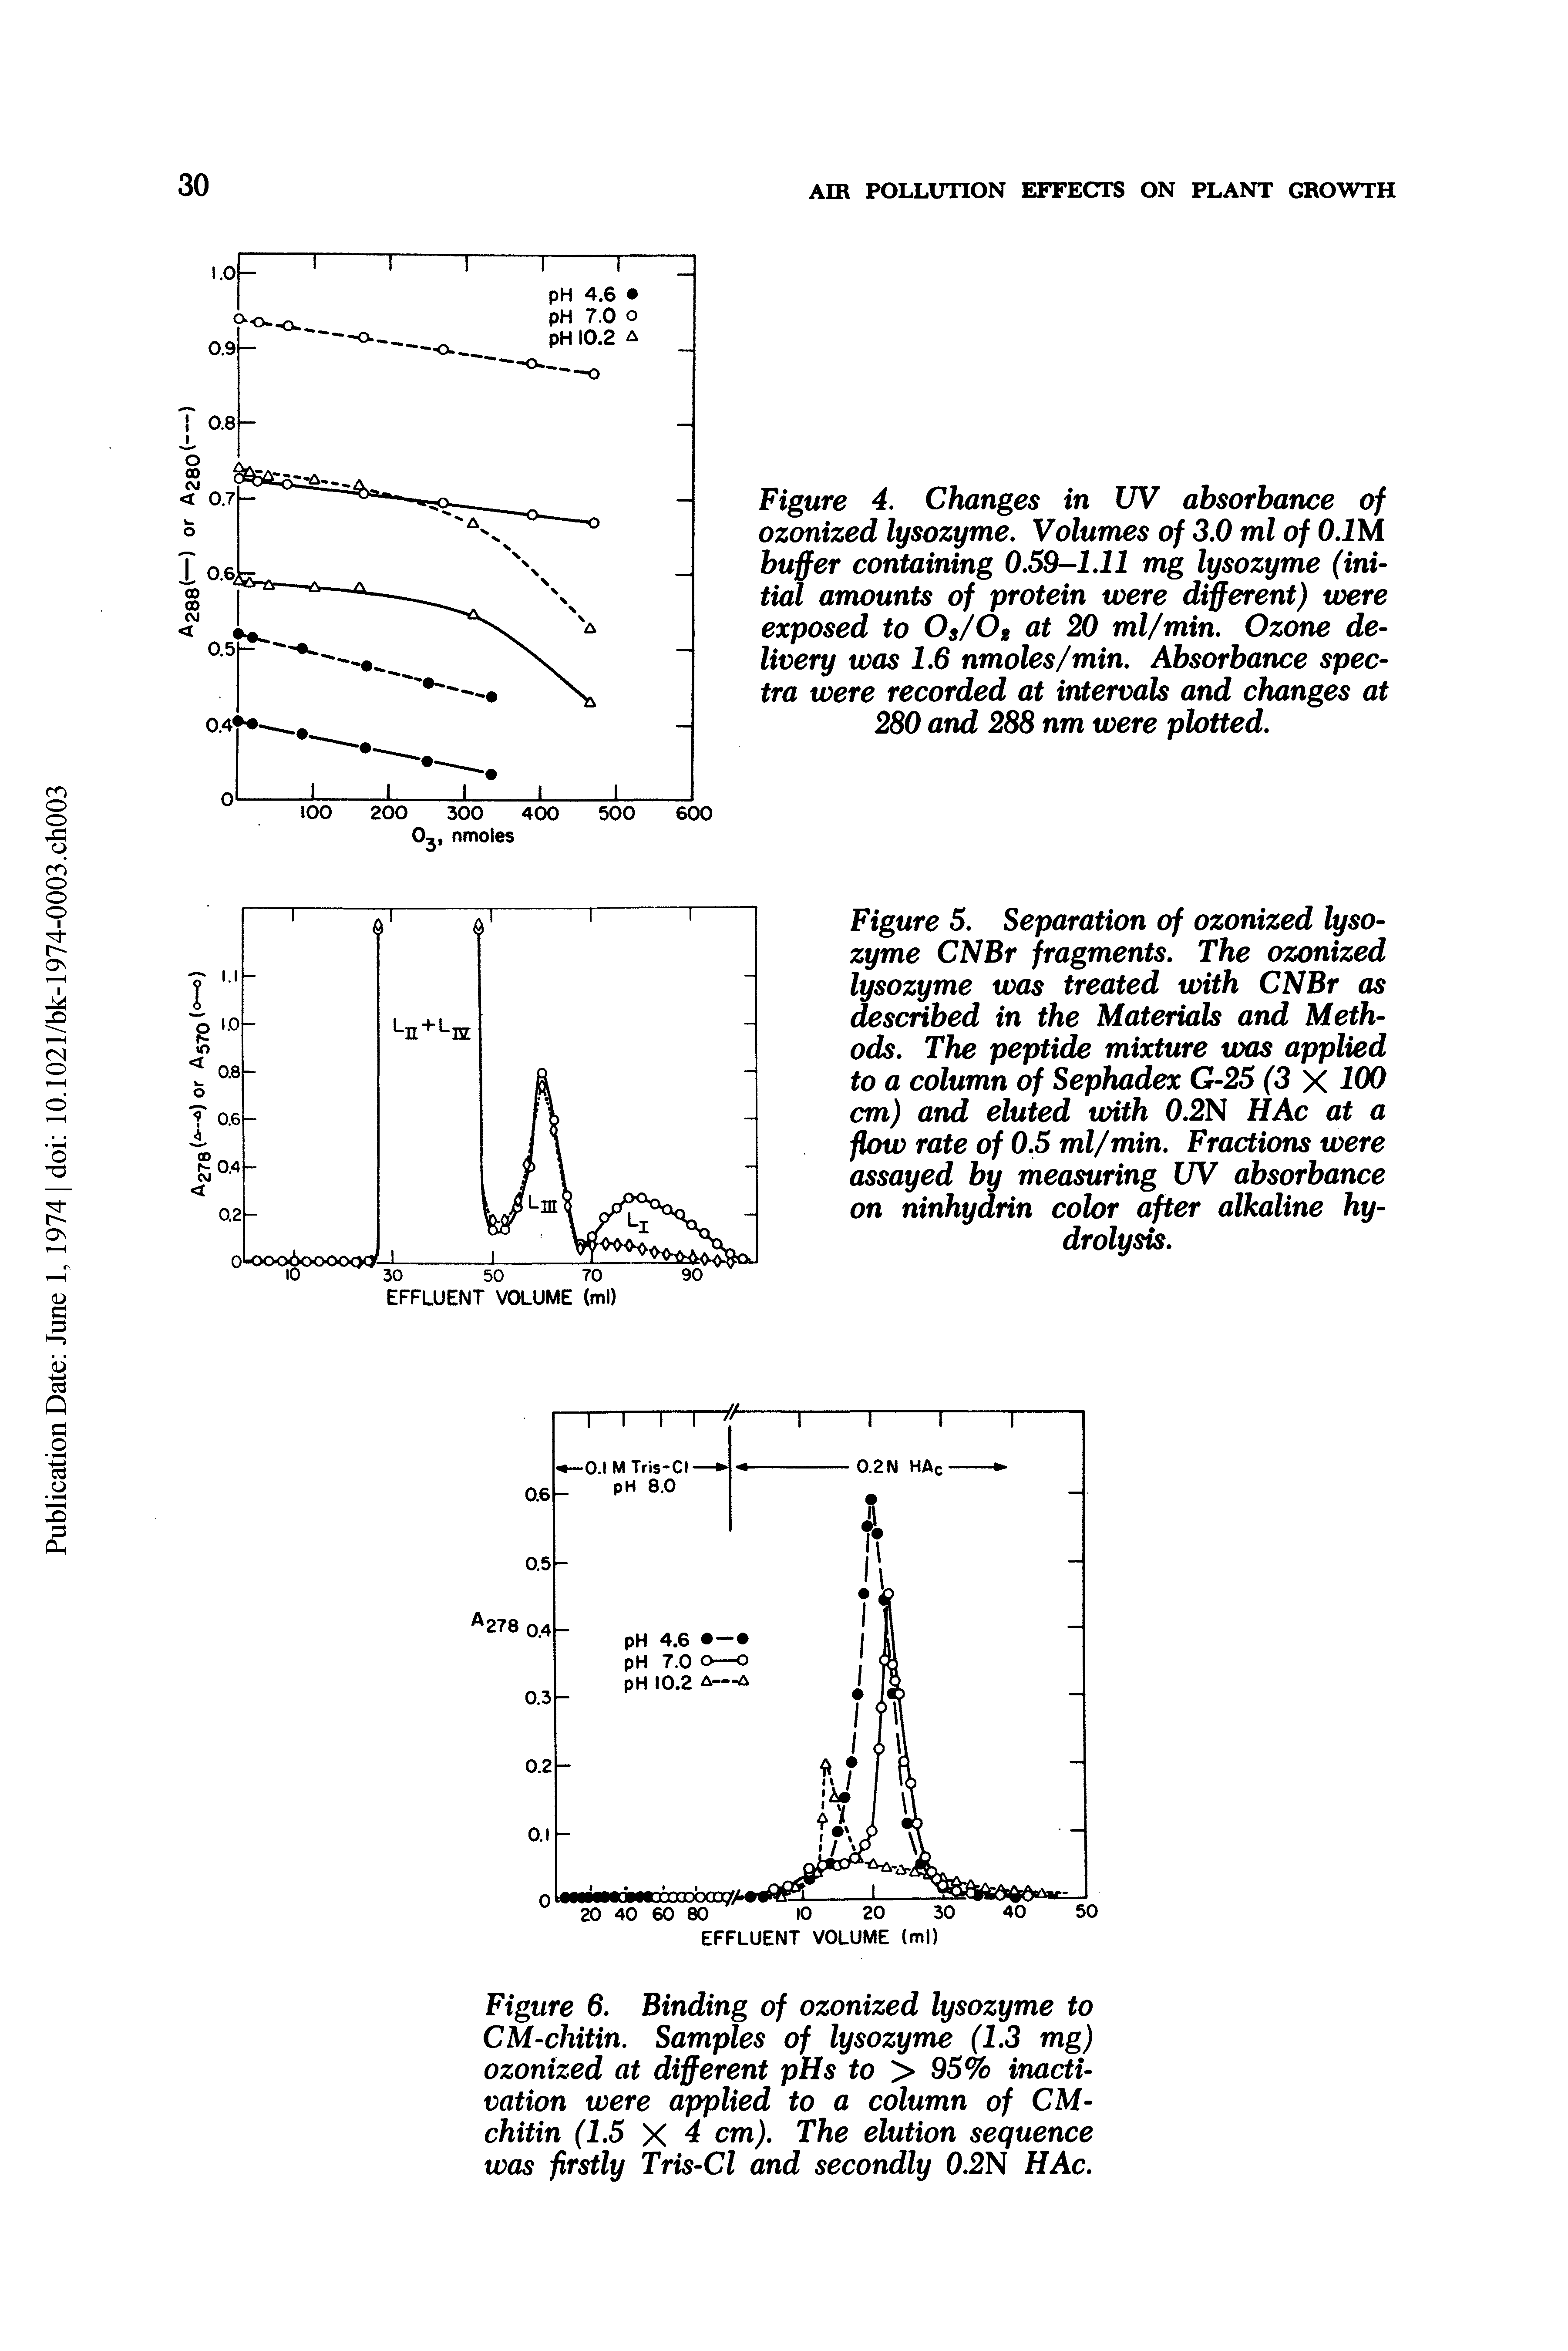 Figure 6. Binding of ozonized lysozyme to CM-chitin. Samples of lysozyme (1.3 mg) ozonized at different pHs to > 95% inactivation were applied to a column of CM-chitin (1.5 X 4 cm). The elution sequence was firstly Tris-Cl and secondly 0.2N HAc.